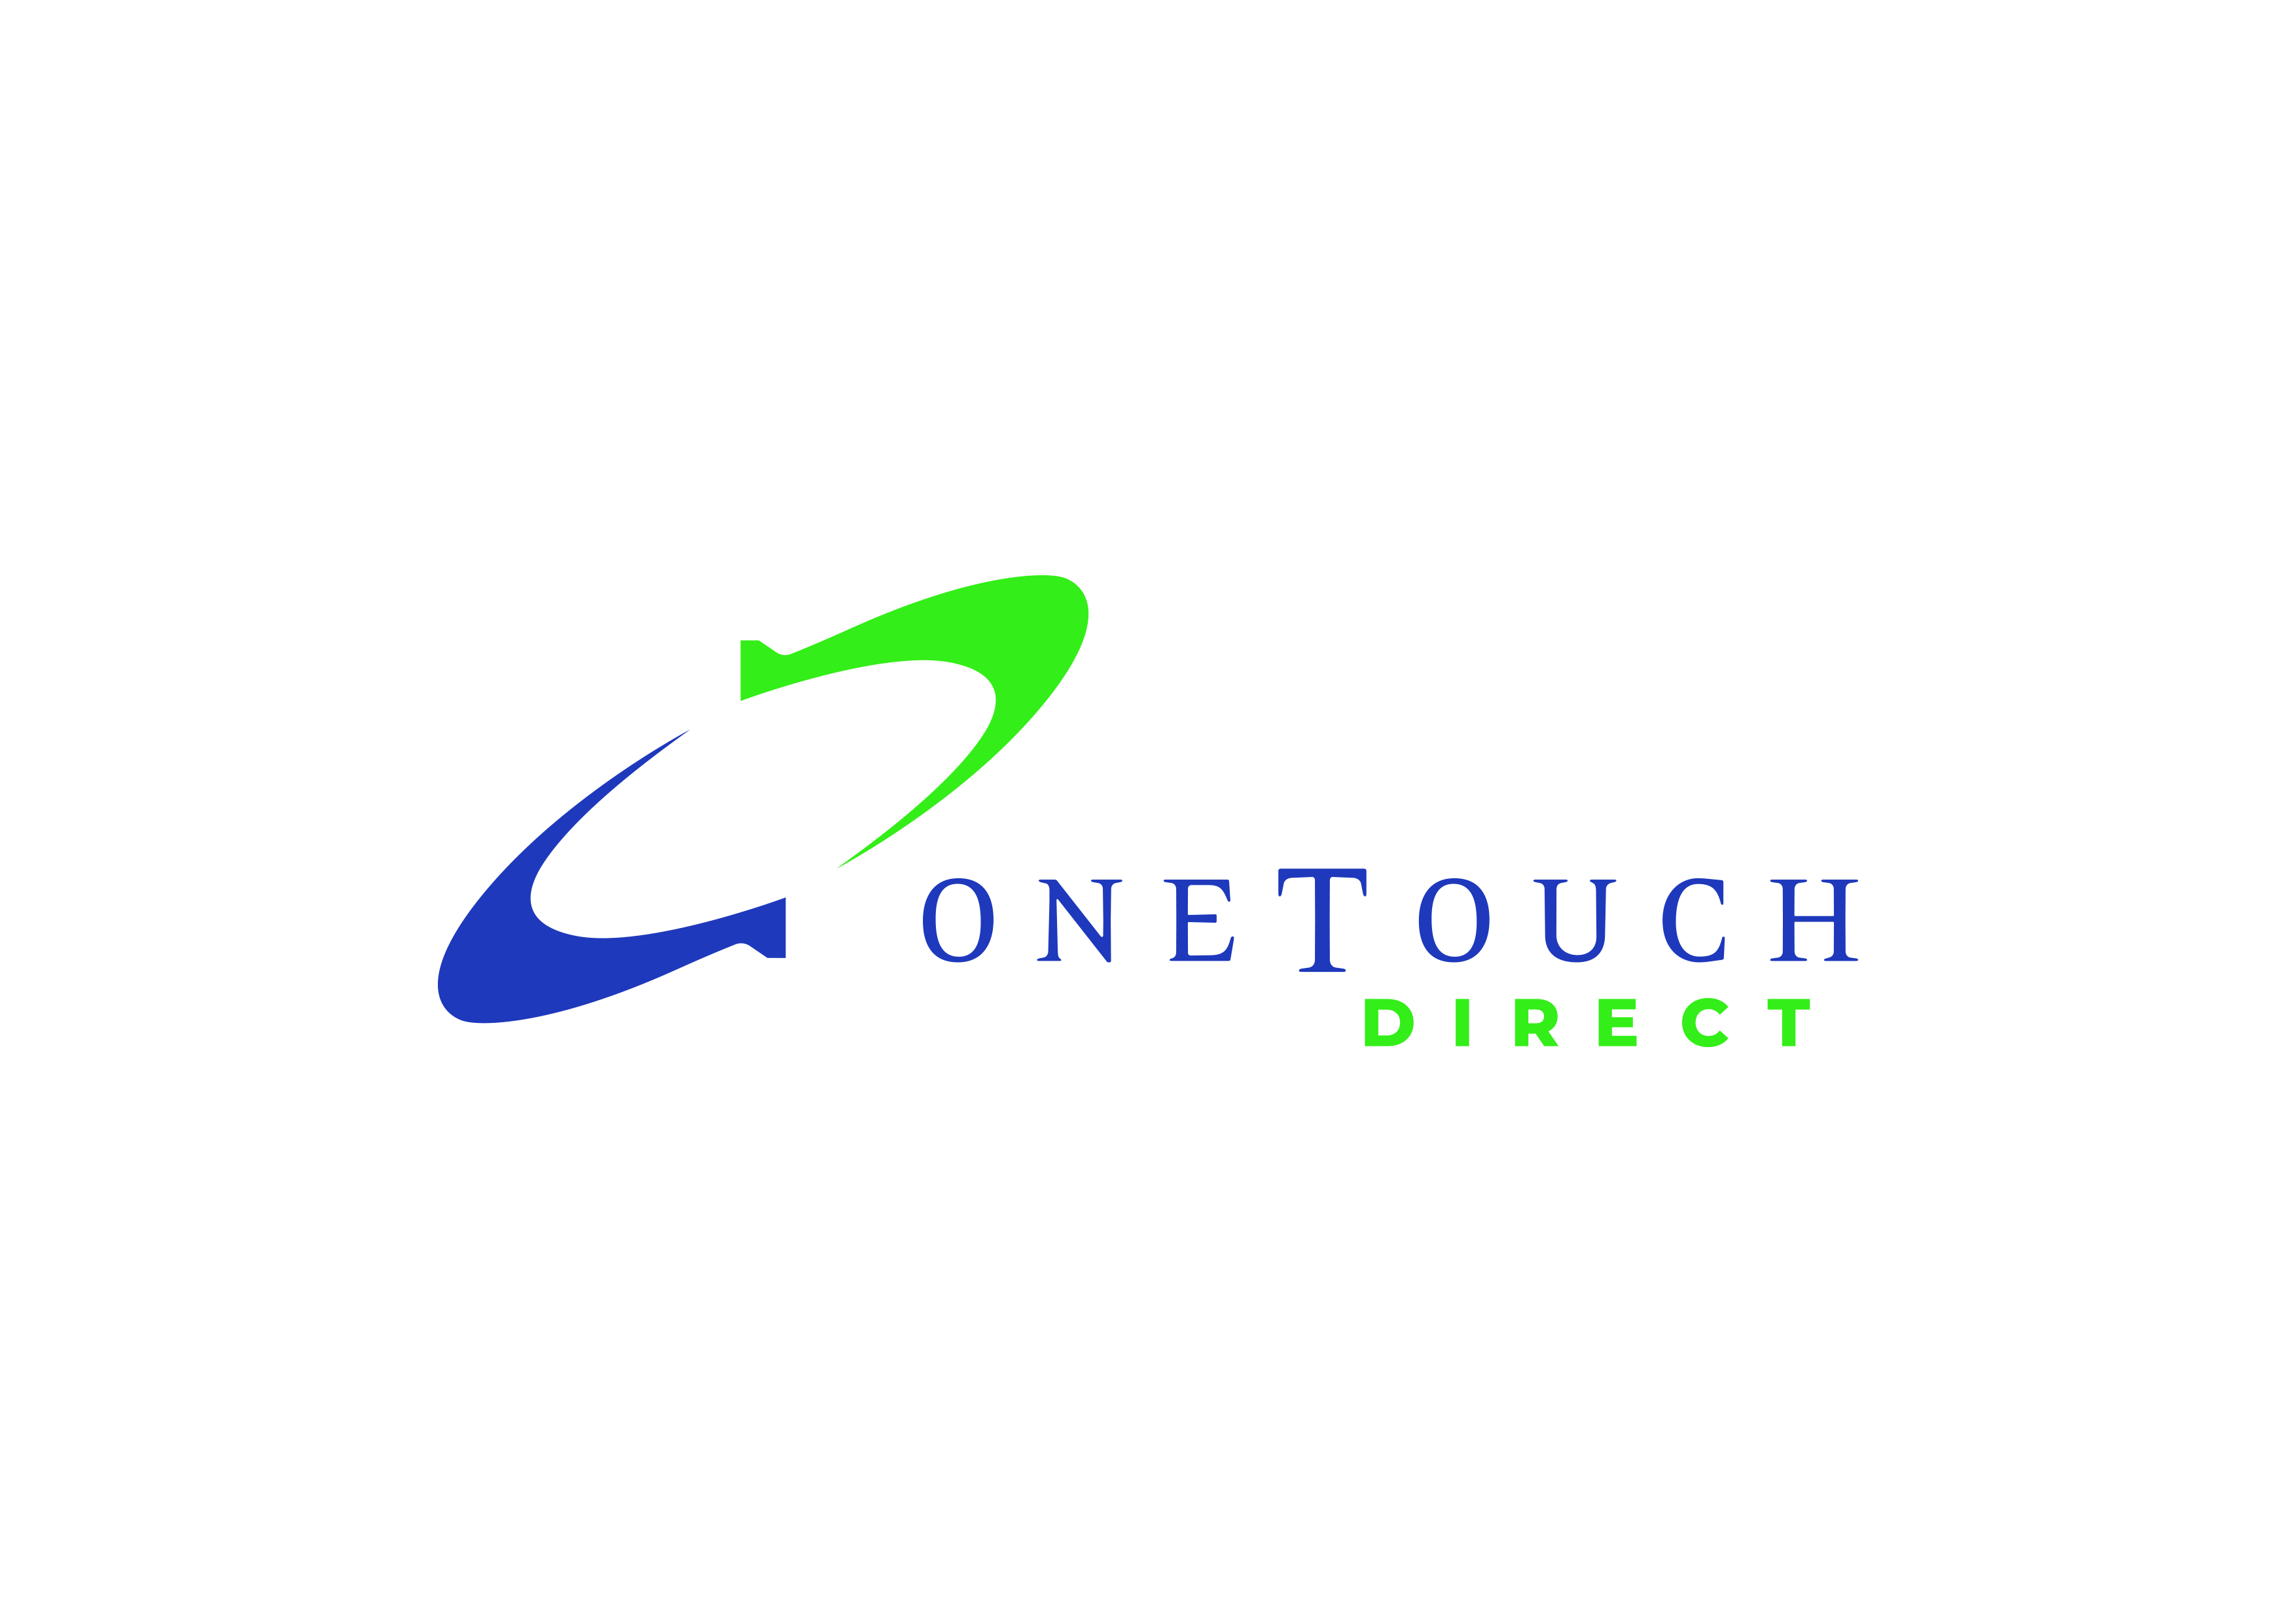 OneTouch Direct logo